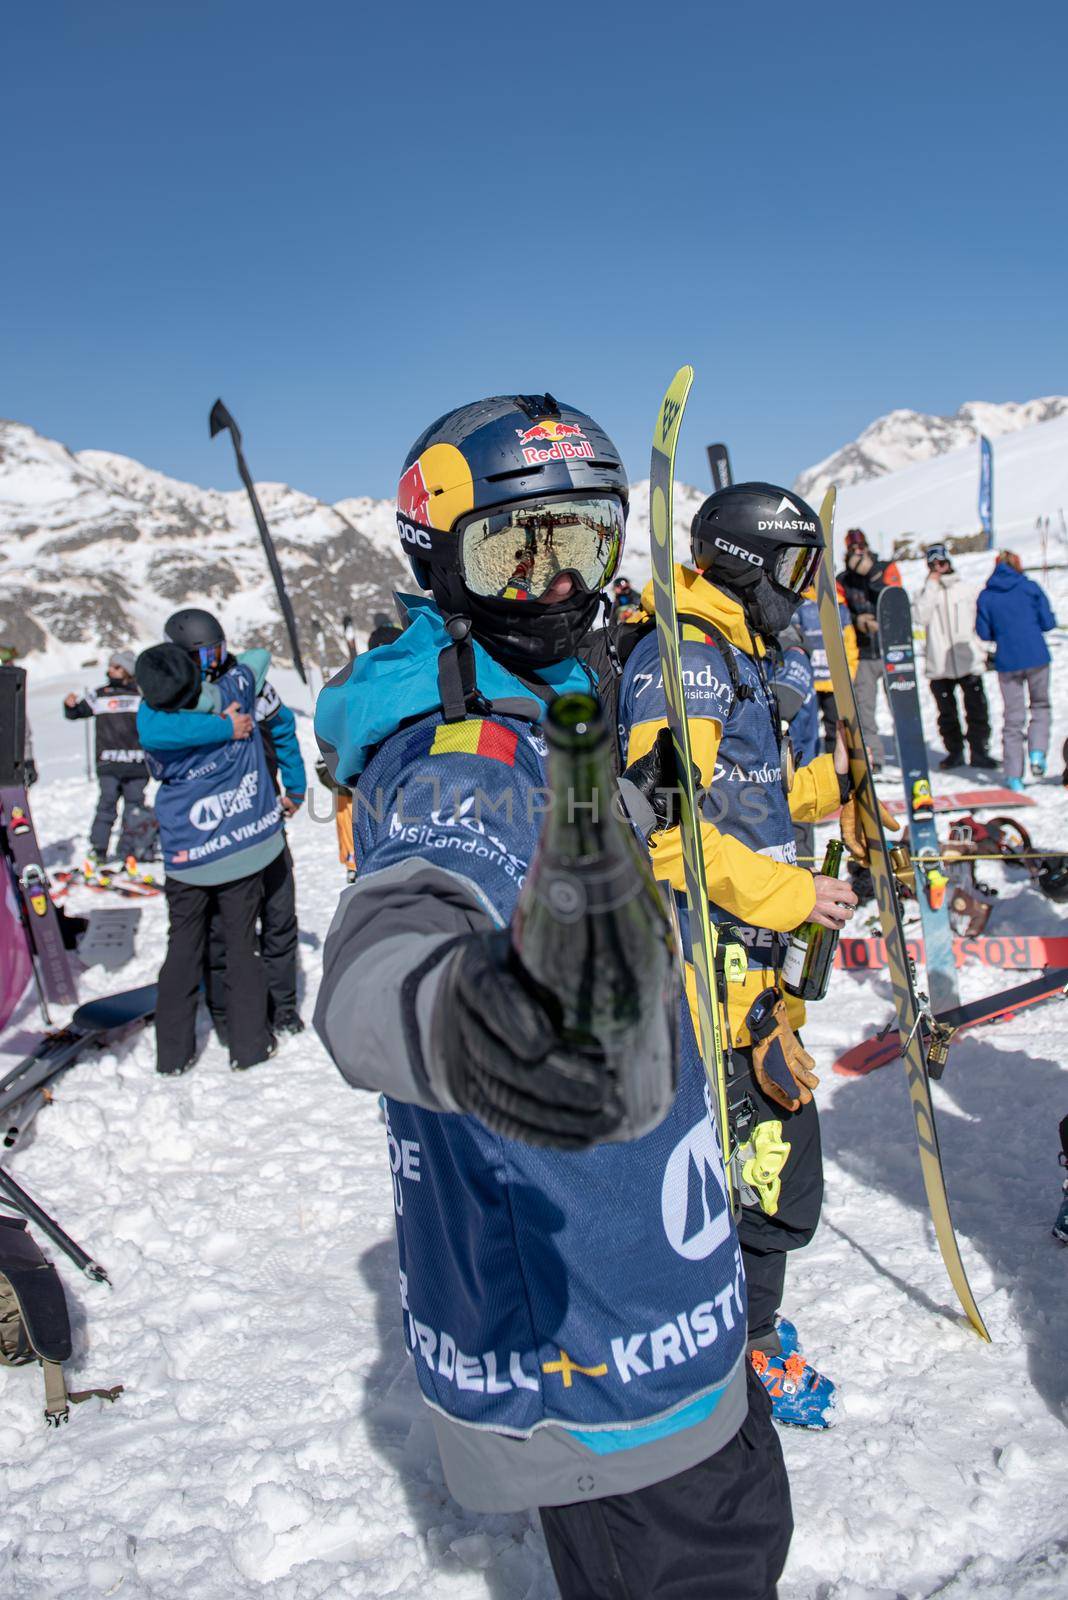 Ordino Arcalis, Andorra: 2021 February 24: Skiers in action at the Freeride World Tour 2021 Step 2 at Ordino Alcalis in Andorra in the winter of 2021.